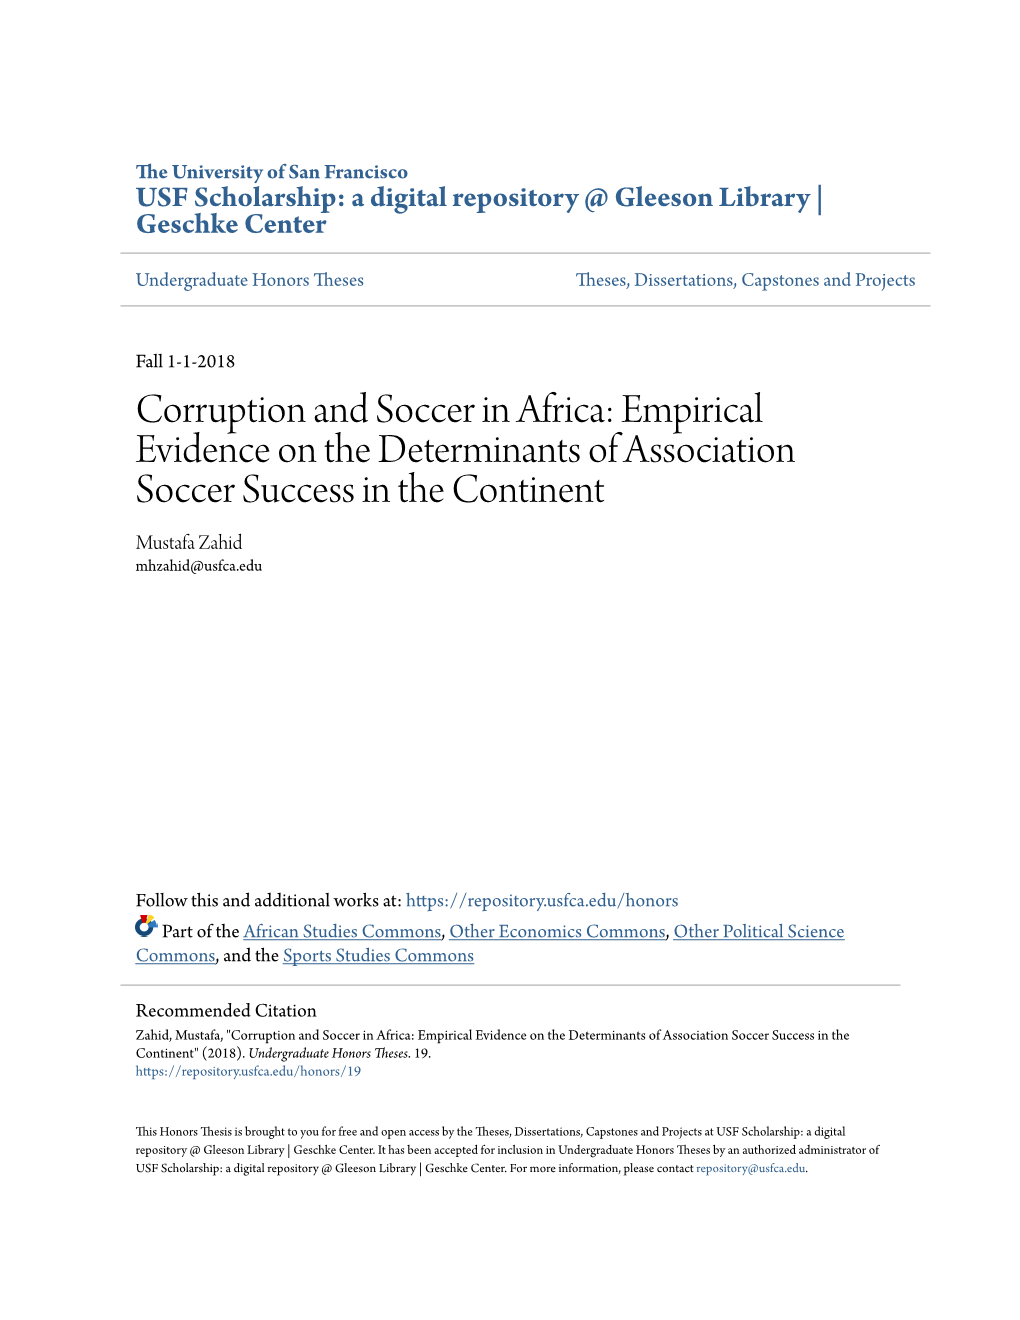 Corruption and Soccer in Africa: Empirical Evidence on the Determinants of Association Soccer Success in the Continent Mustafa Zahid Mhzahid@Usfca.Edu